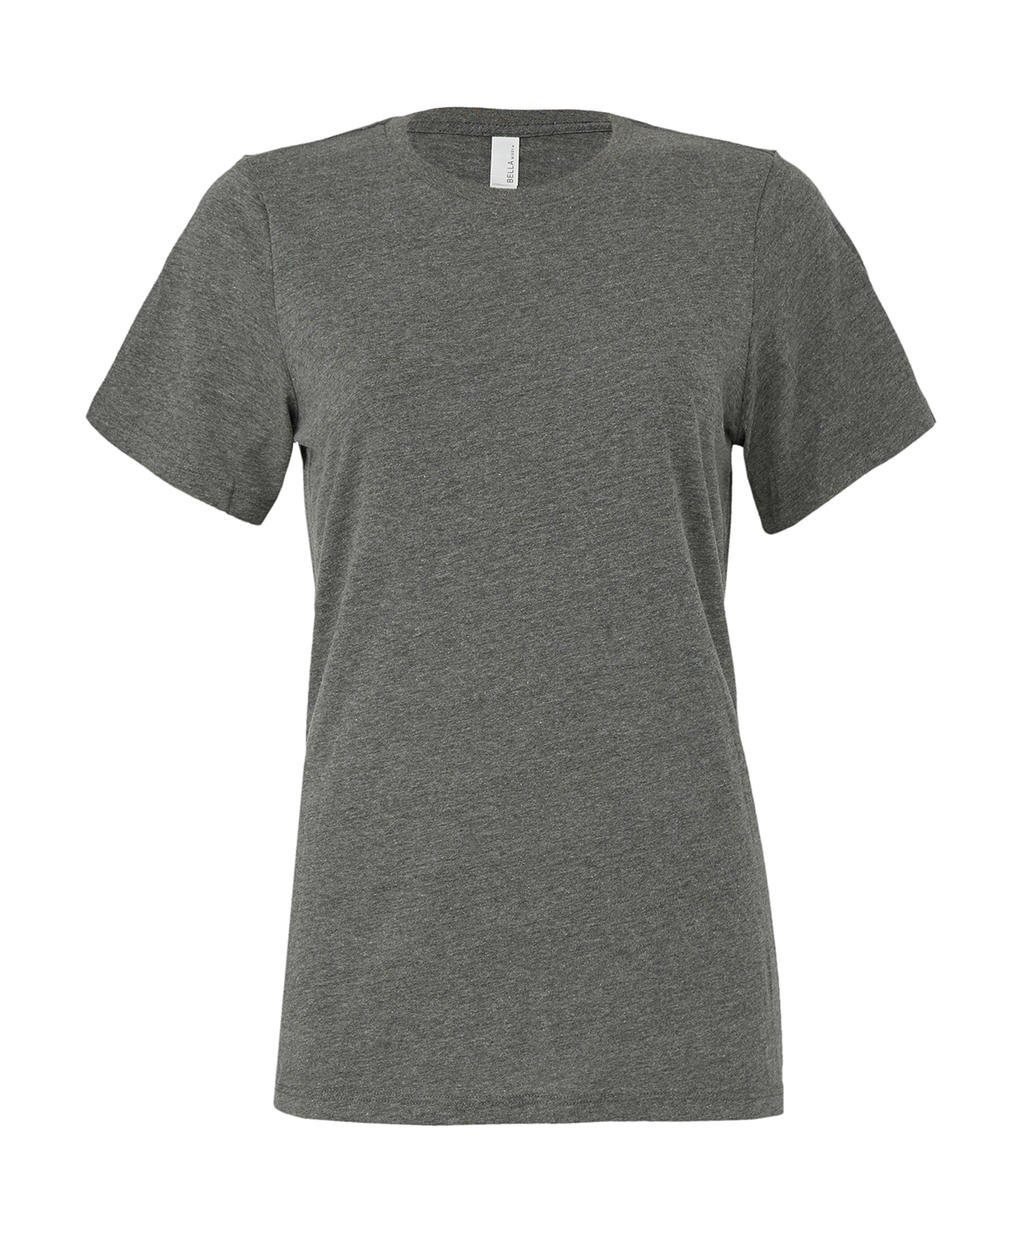  Womens Relaxed Jersey Short Sleeve Tee in Farbe Deep Heather